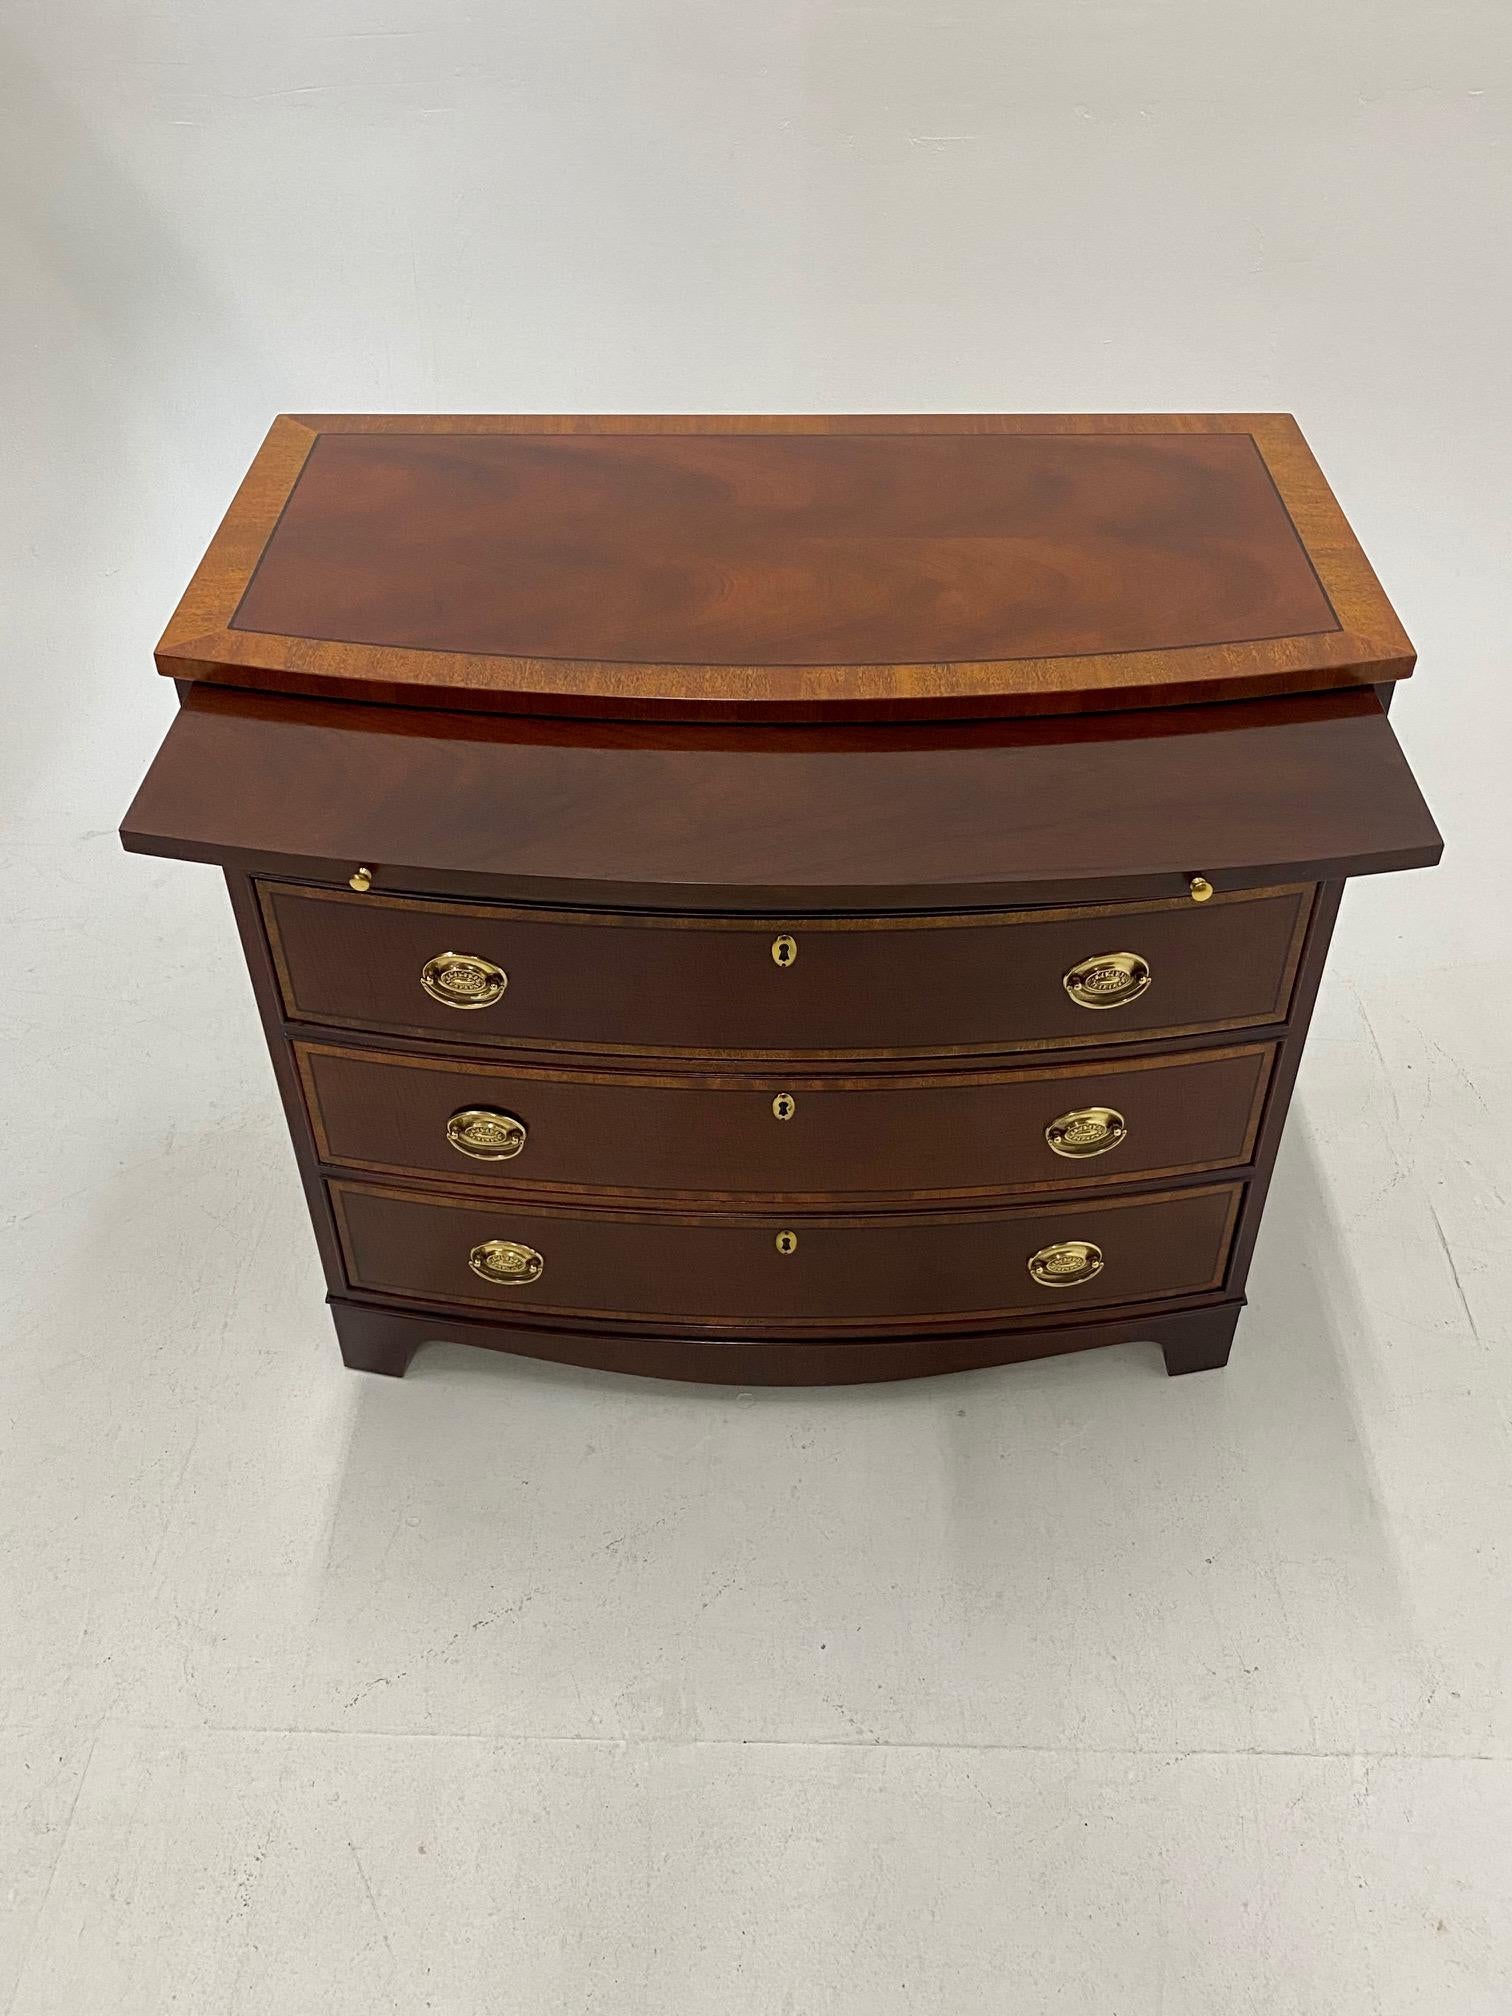 Classic mahogany and satinwood inlay medium sized bachelors chest of drawers having 4 drawers and elegant brasses.